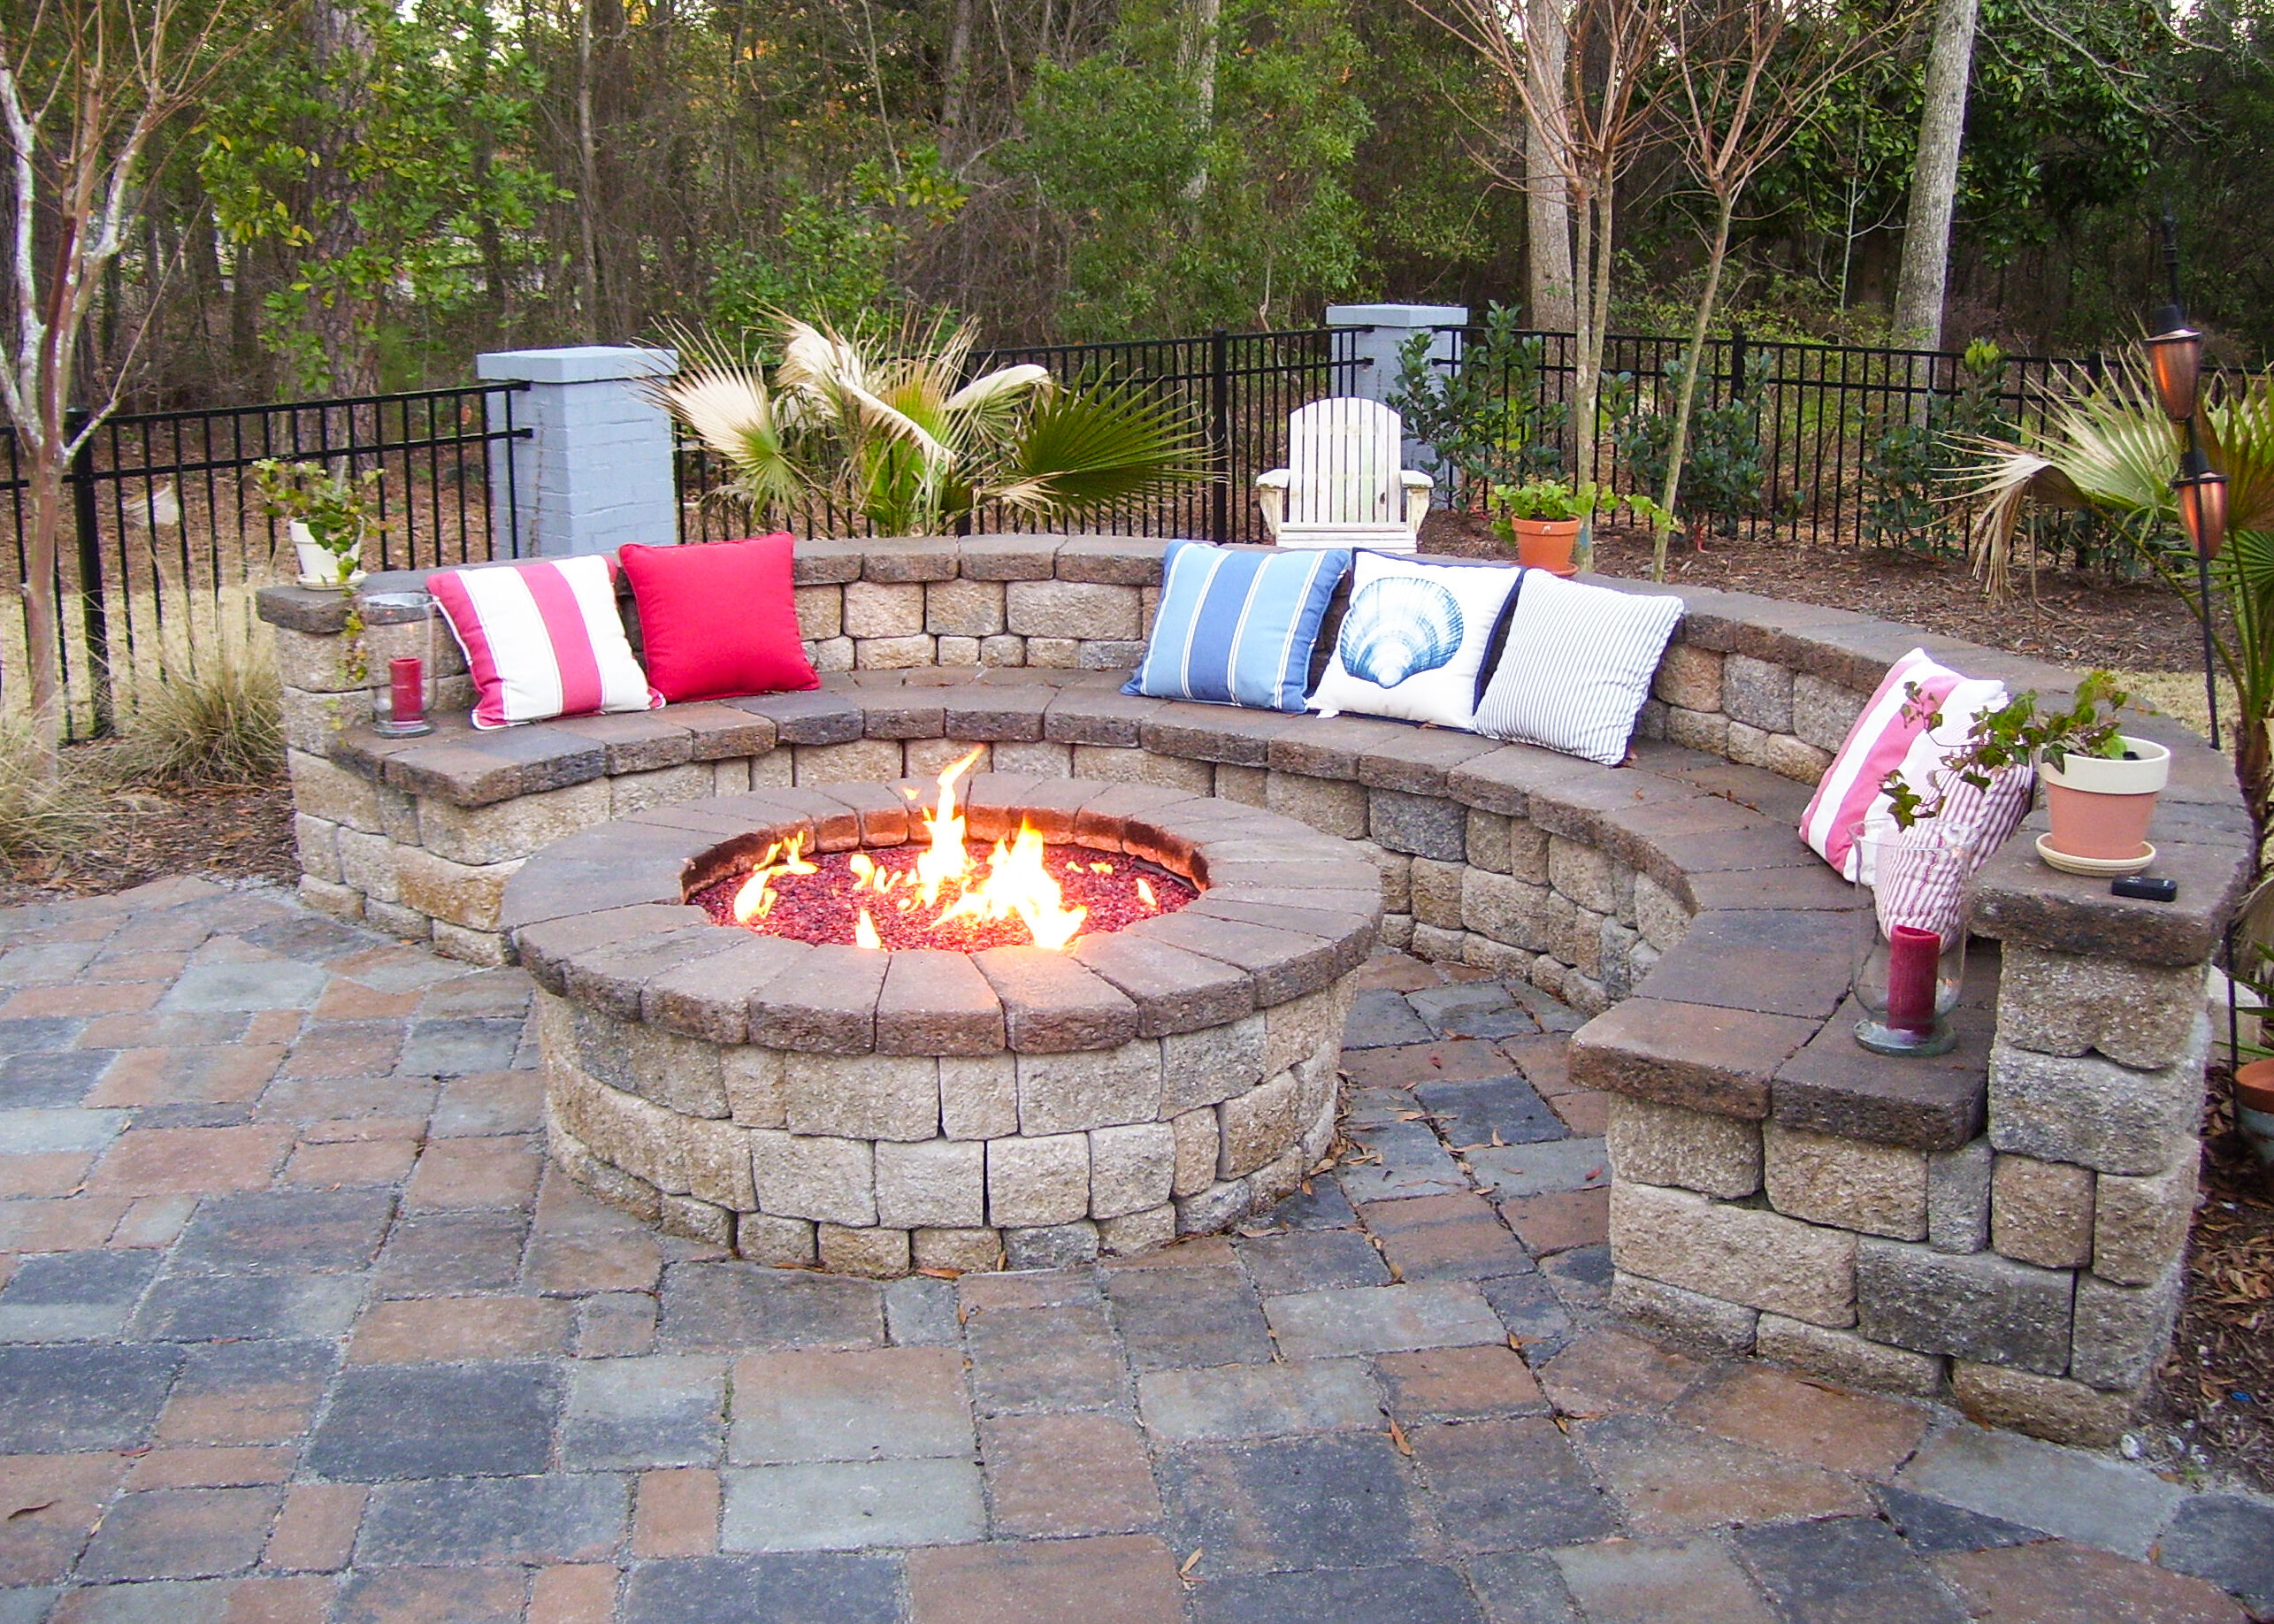 3 Easy Diy Fire Pit Ideas, Companies That Build Outdoor Fire Pits